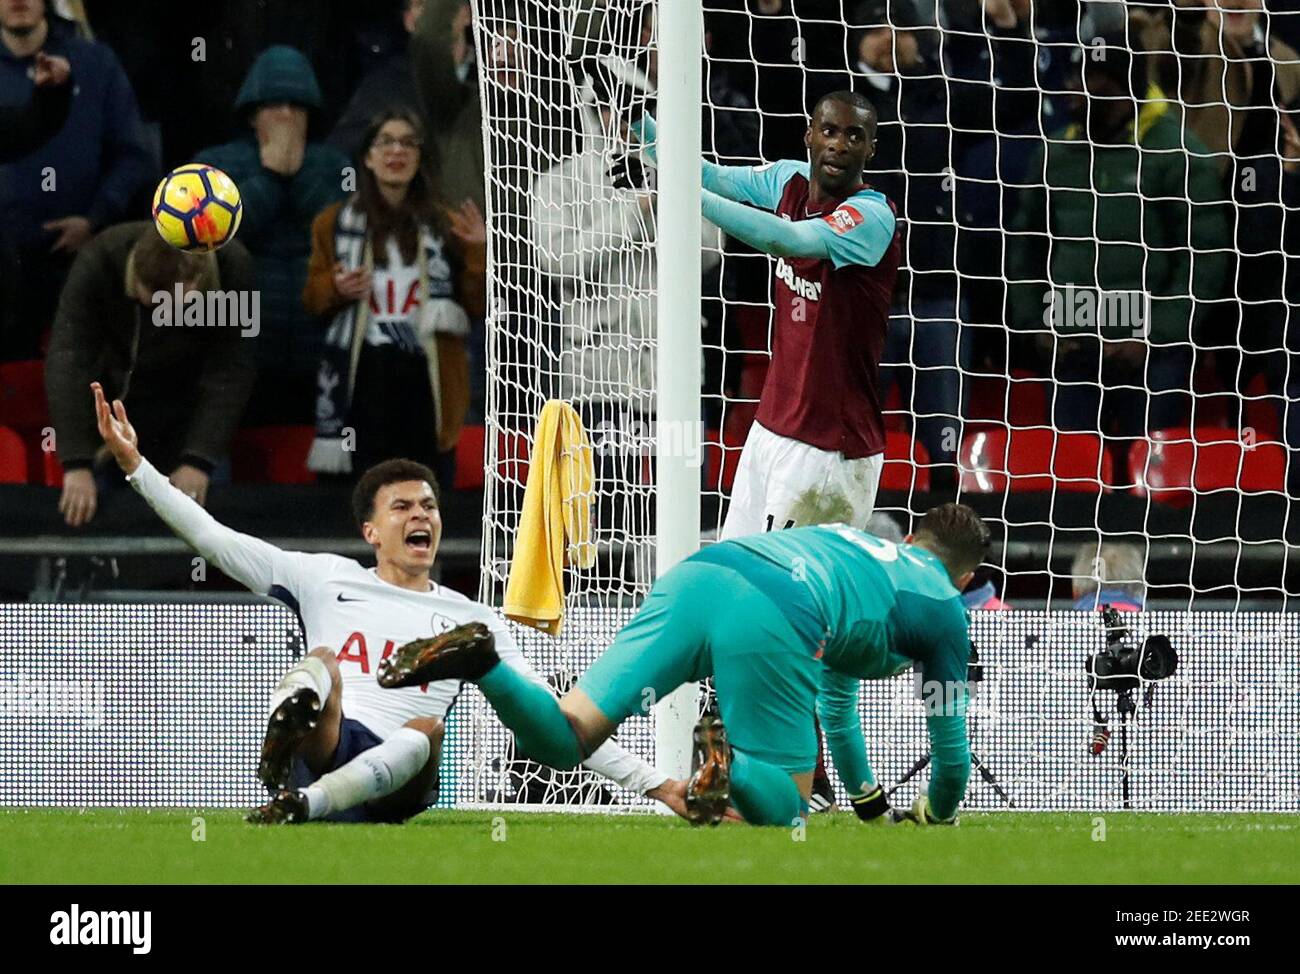 Soccer Football - Premier League - Tottenham Hotspur vs West Ham United - Wembley Stadium, London, Britain - January 4, 2018   Tottenham's Dele Alli appeals after a challenge by West Ham United's Adrian   REUTERS/Eddie Keogh    EDITORIAL USE ONLY. No use with unauthorized audio, video, data, fixture lists, club/league logos or 'live' services. Online in-match use limited to 75 images, no video emulation. No use in betting, games or single club/league/player publications.  Please contact your account representative for further details. Stock Photo